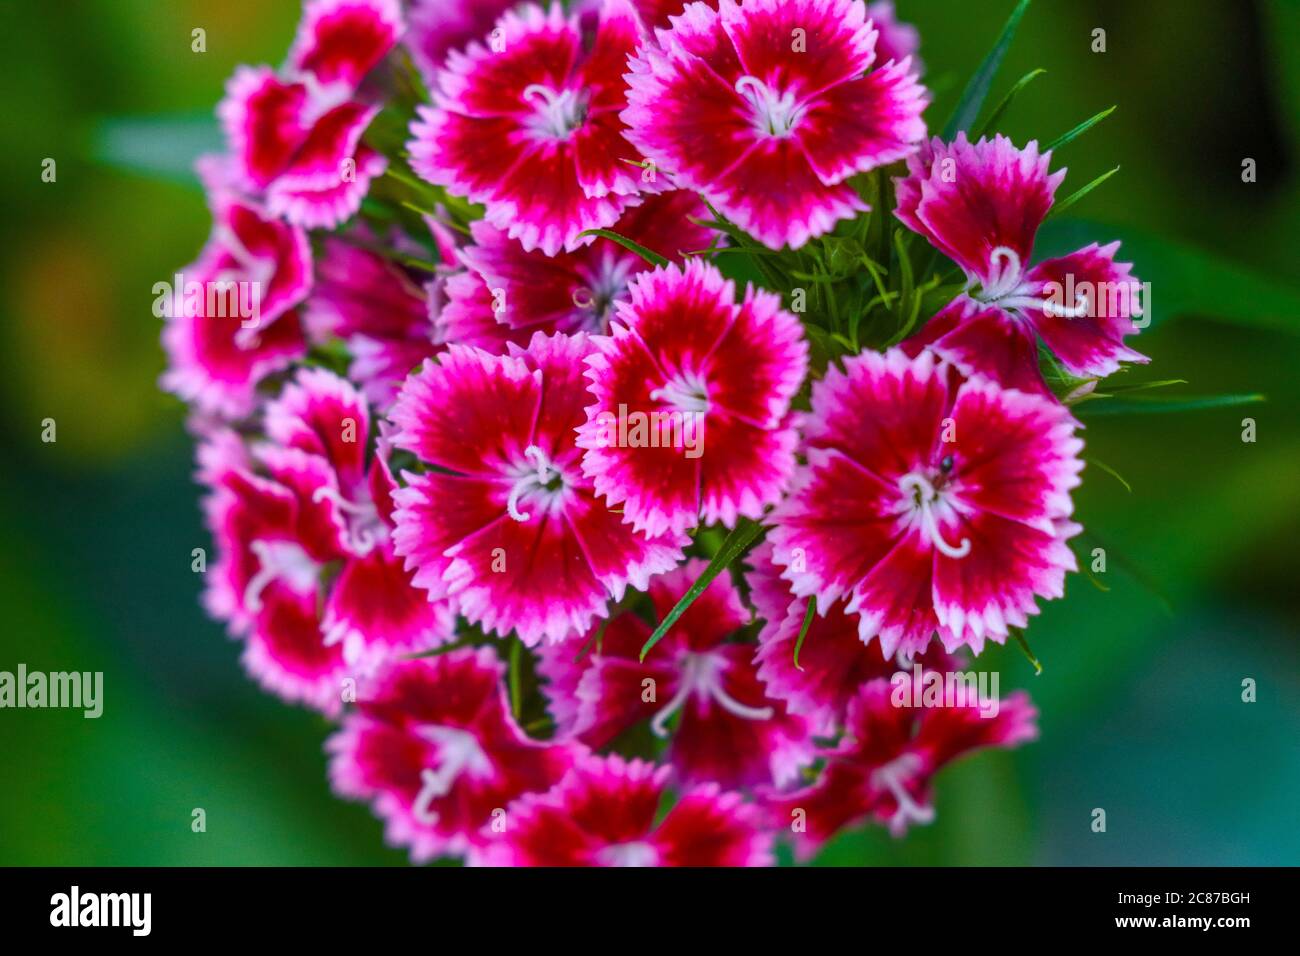 Dianthus barbatus, sweet william flower plant blooming over green blurry background Stock Photo